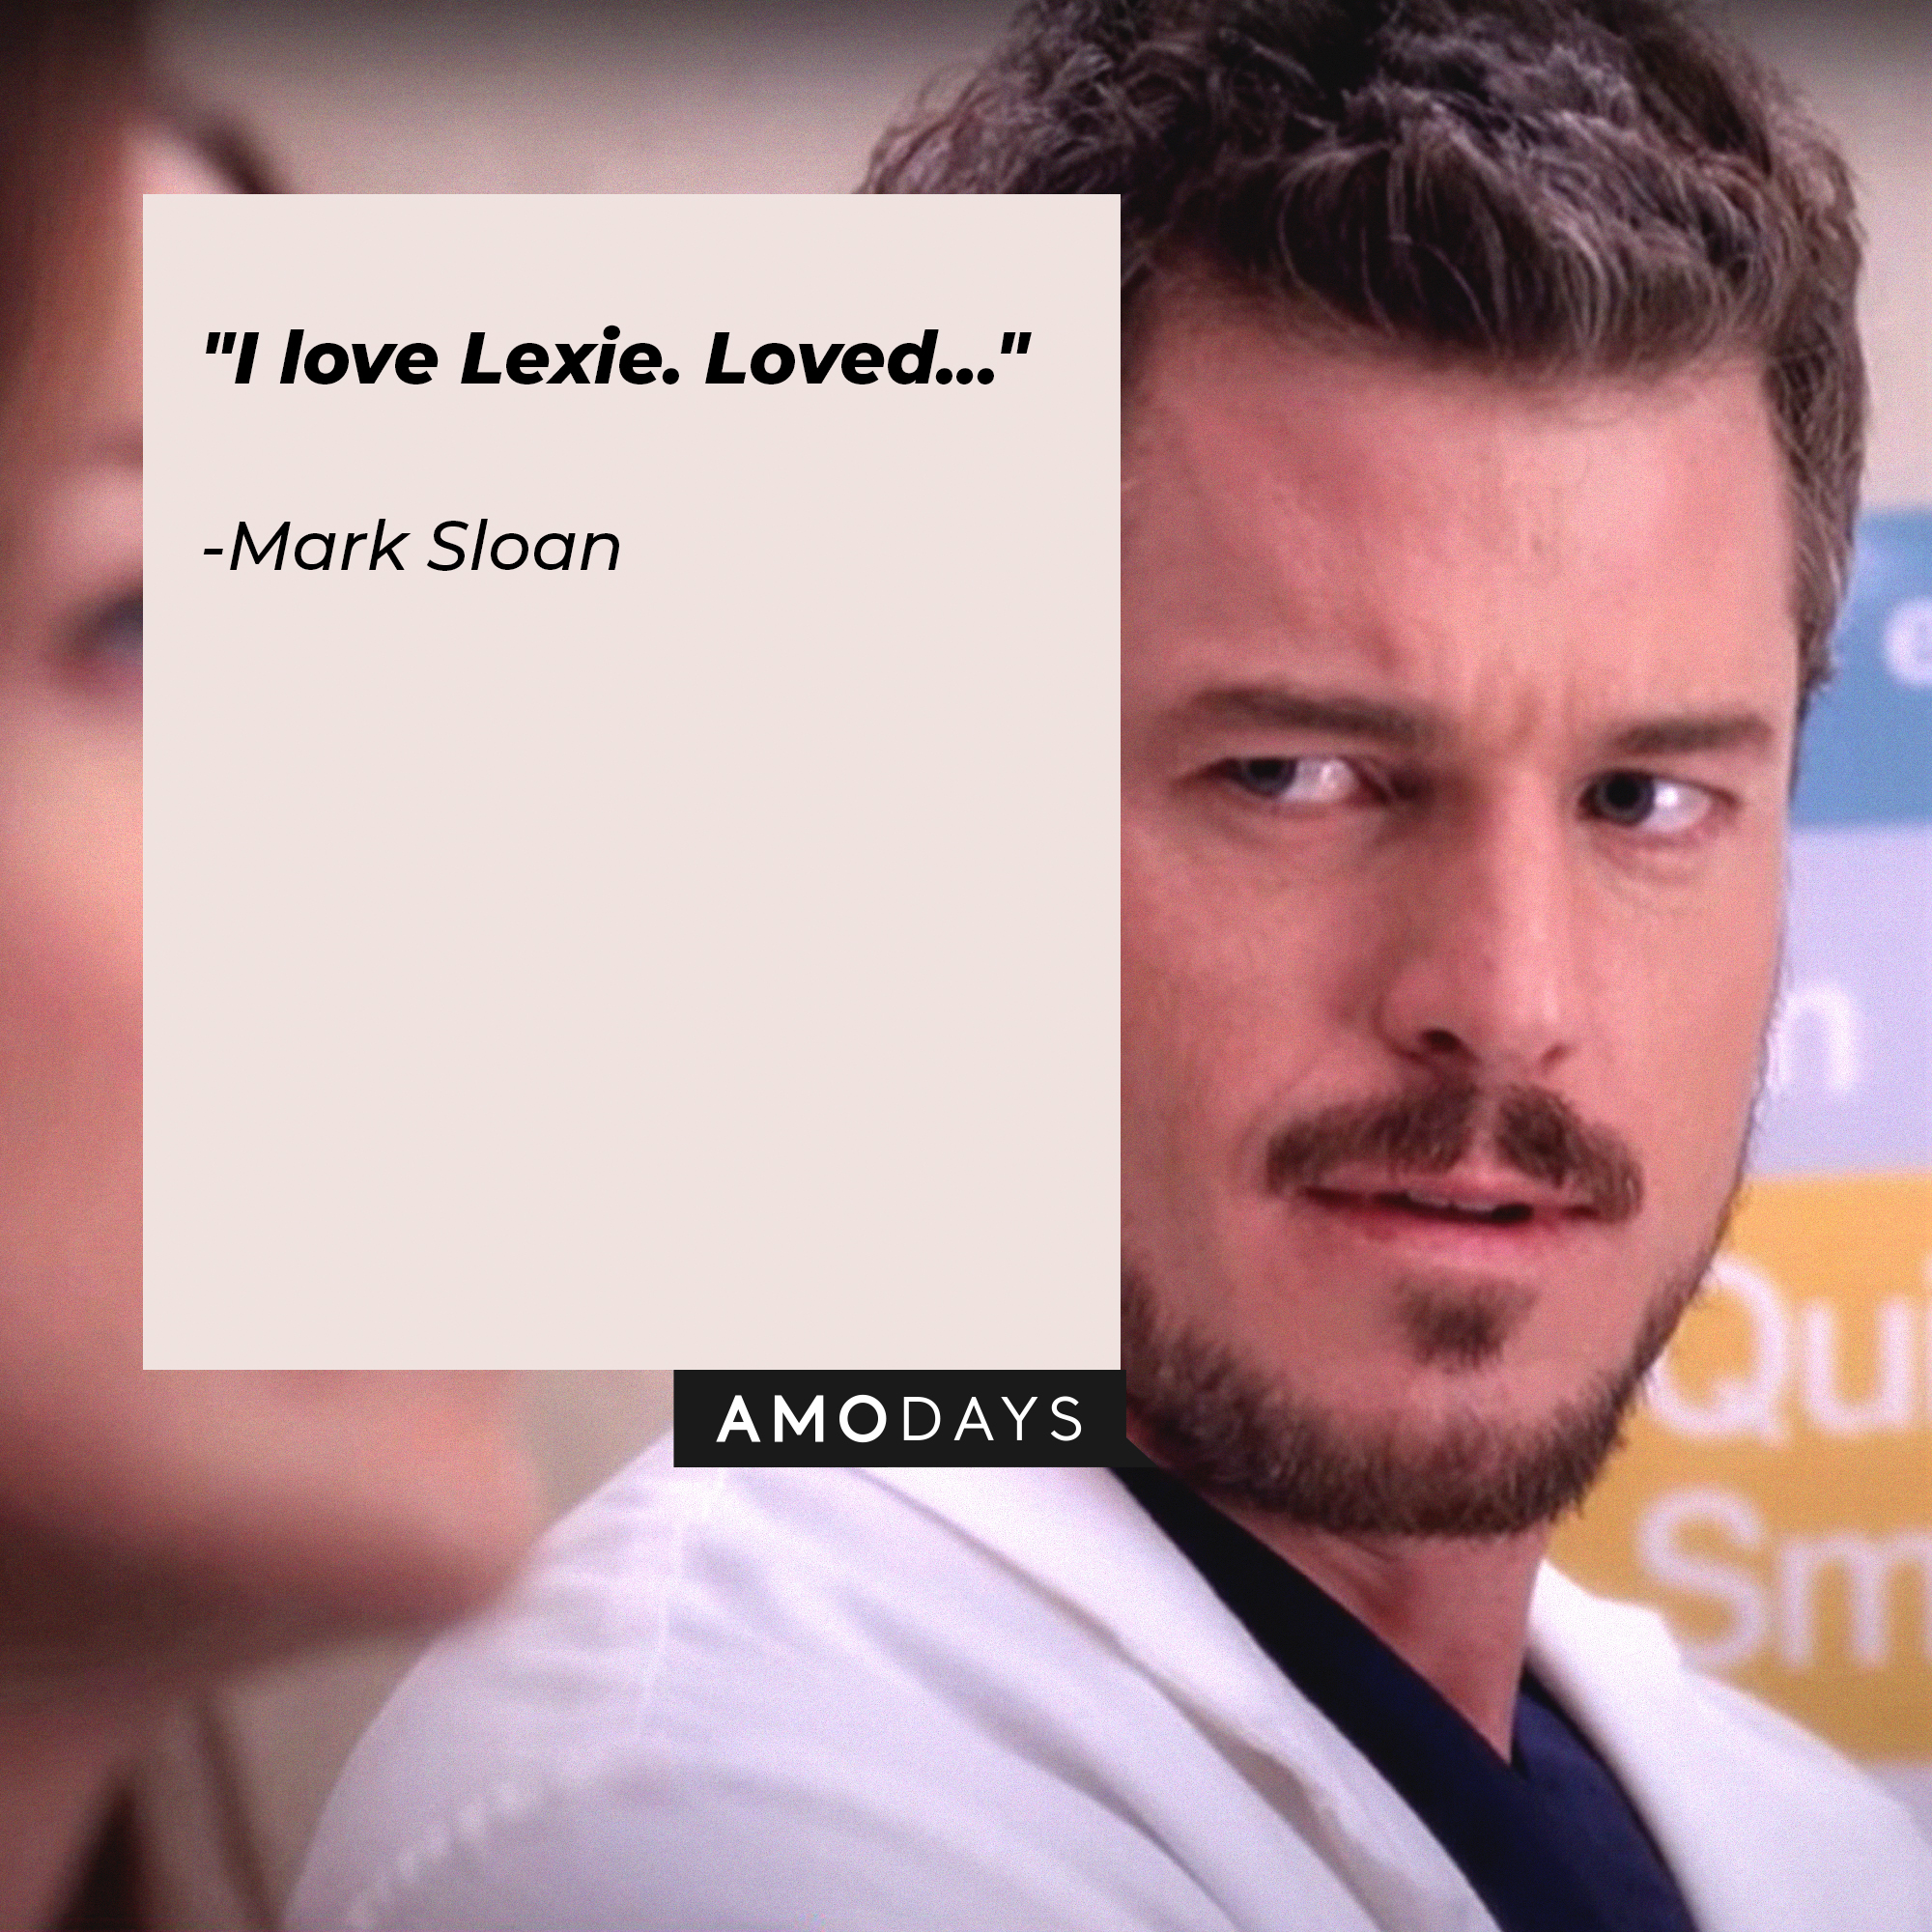 Mark Sloan's quote: "I love Lexie. Loved…" | Image: AmoDays